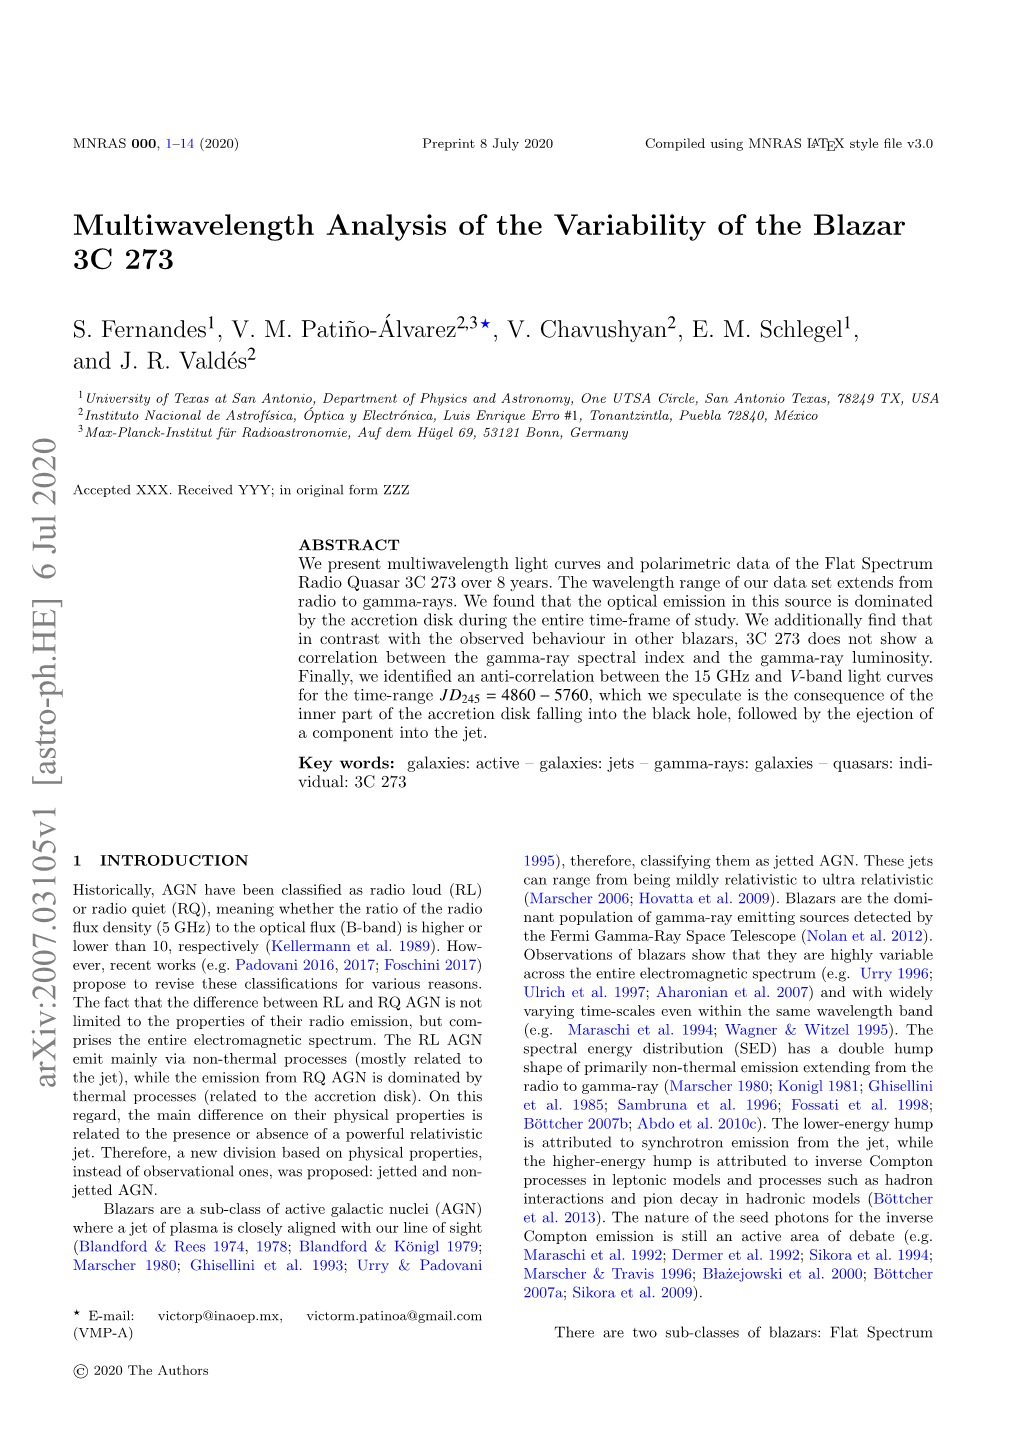 Multiwavelength Analysis of the Variability of the Blazar 3C 273